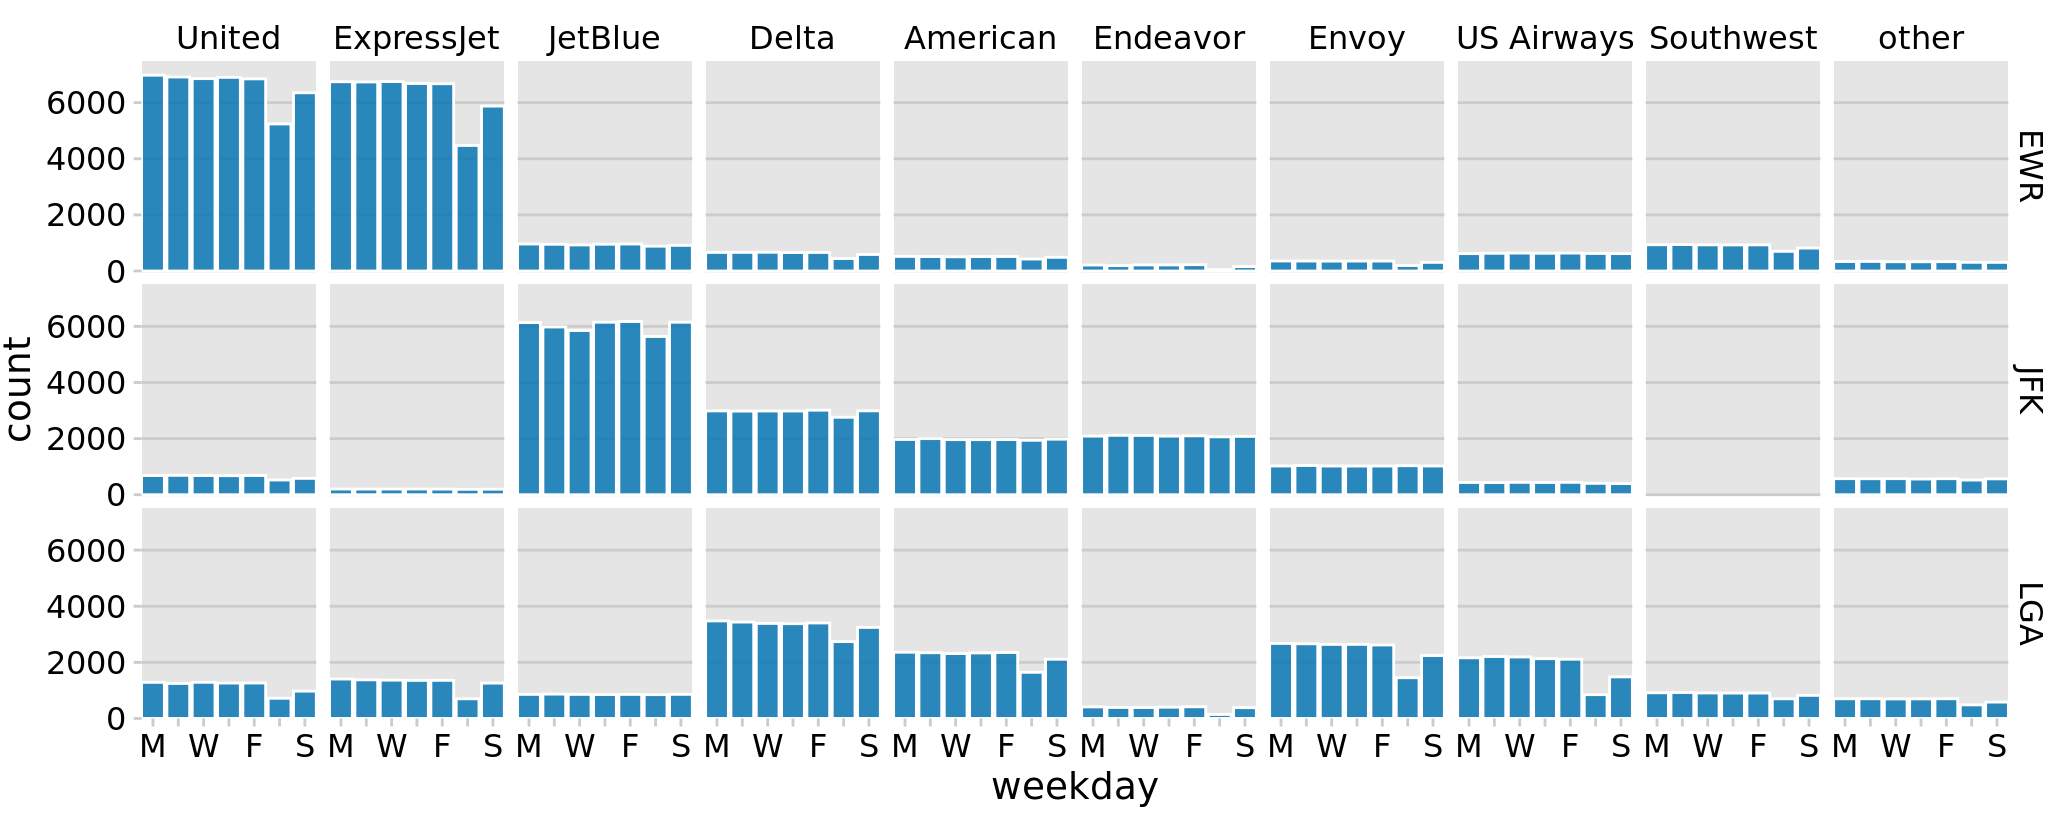 Departures out of airports in the New York city area in 2013, broken down by airline, airport, and weekday. United Airlines and ExpressJet make up most of the departures out of Newark Airport (EWR), JetBlue, Delta, American, and Endeavor make up most of the departures out of JFK, and Delta, American, Envoy, and US Airways make up most of the departures out of LaGuardia (LGA). Most but not all airlines have fewer departures on weekends than during the work week. Data source: U.S. Dept. of Transportation, Bureau of Transportation Statistics.